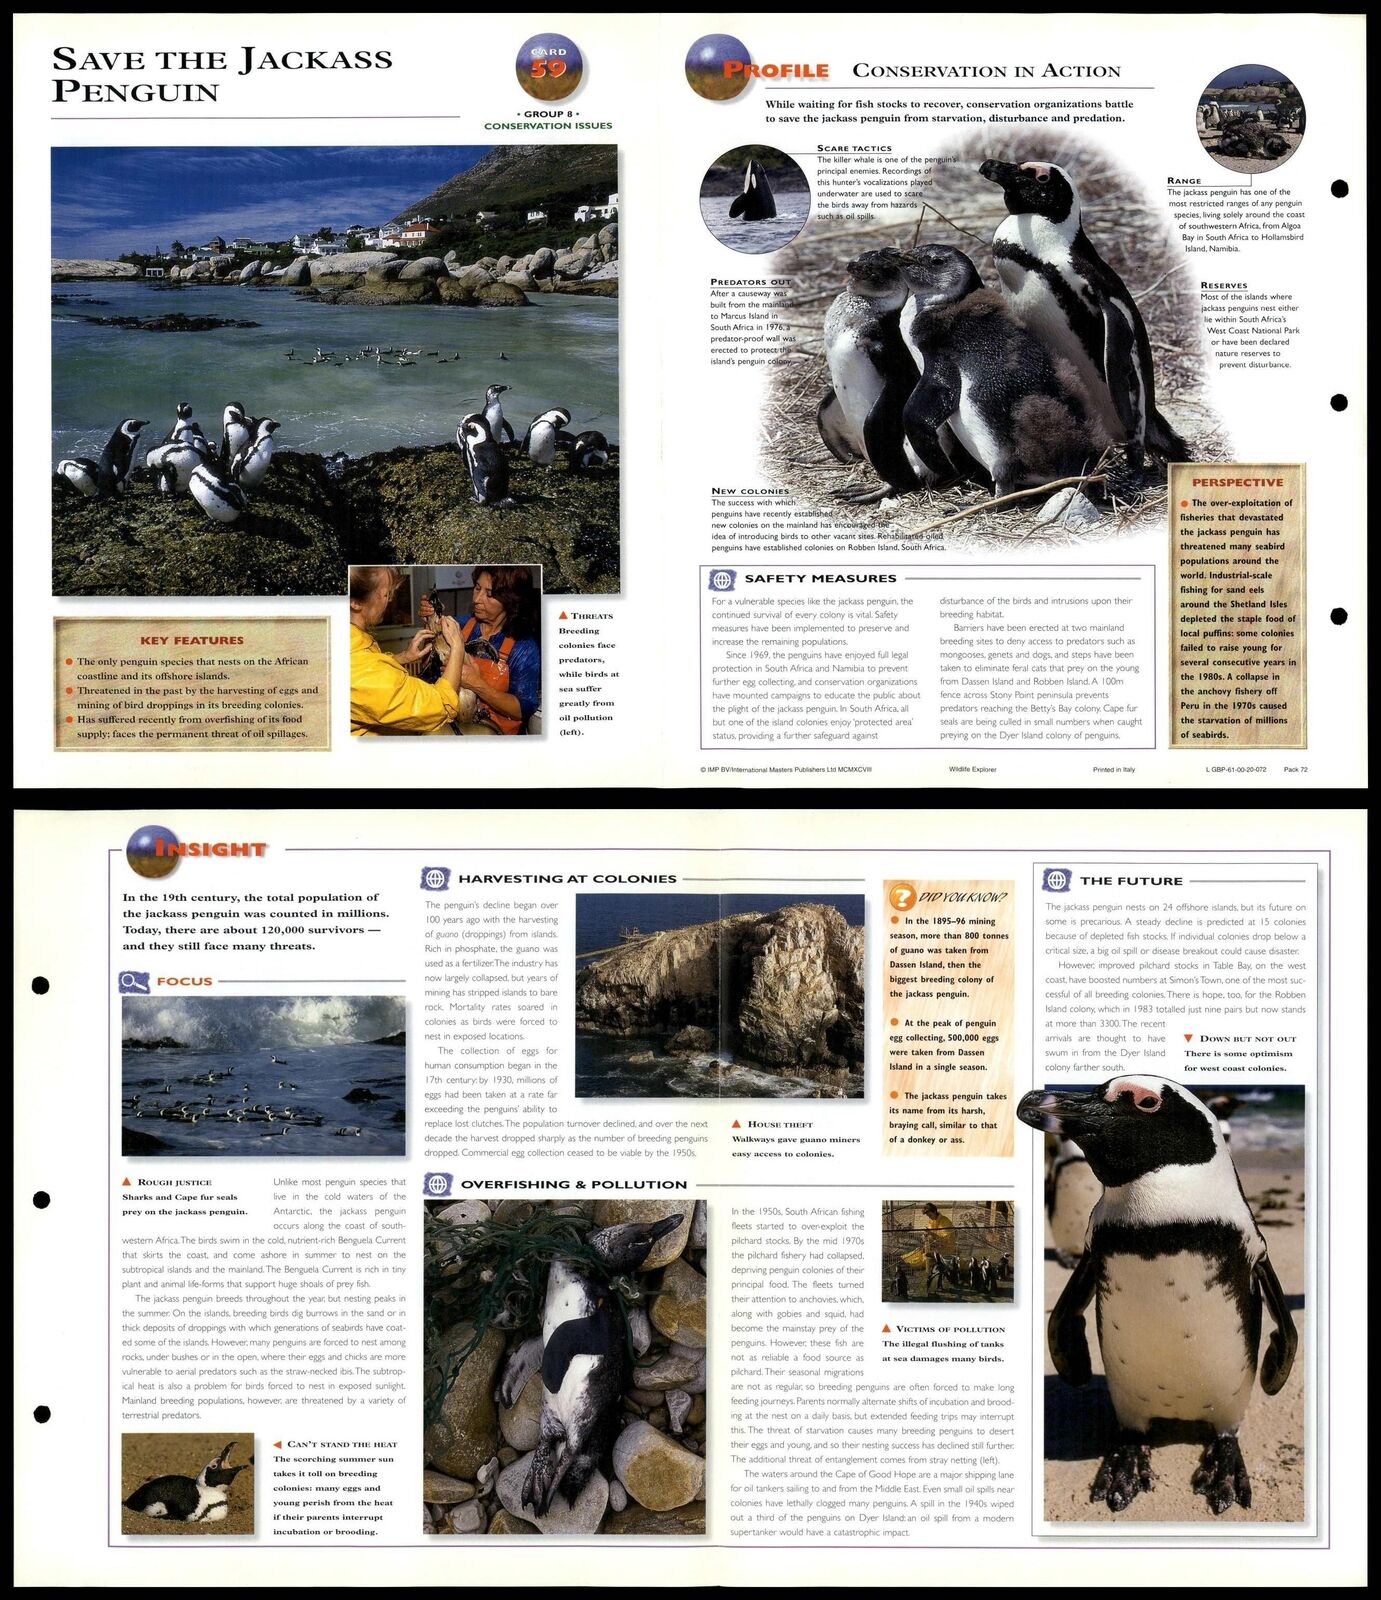 Save The Jackass Penguin #59 Conservation - Wildlife Explorer Fold-Out Card